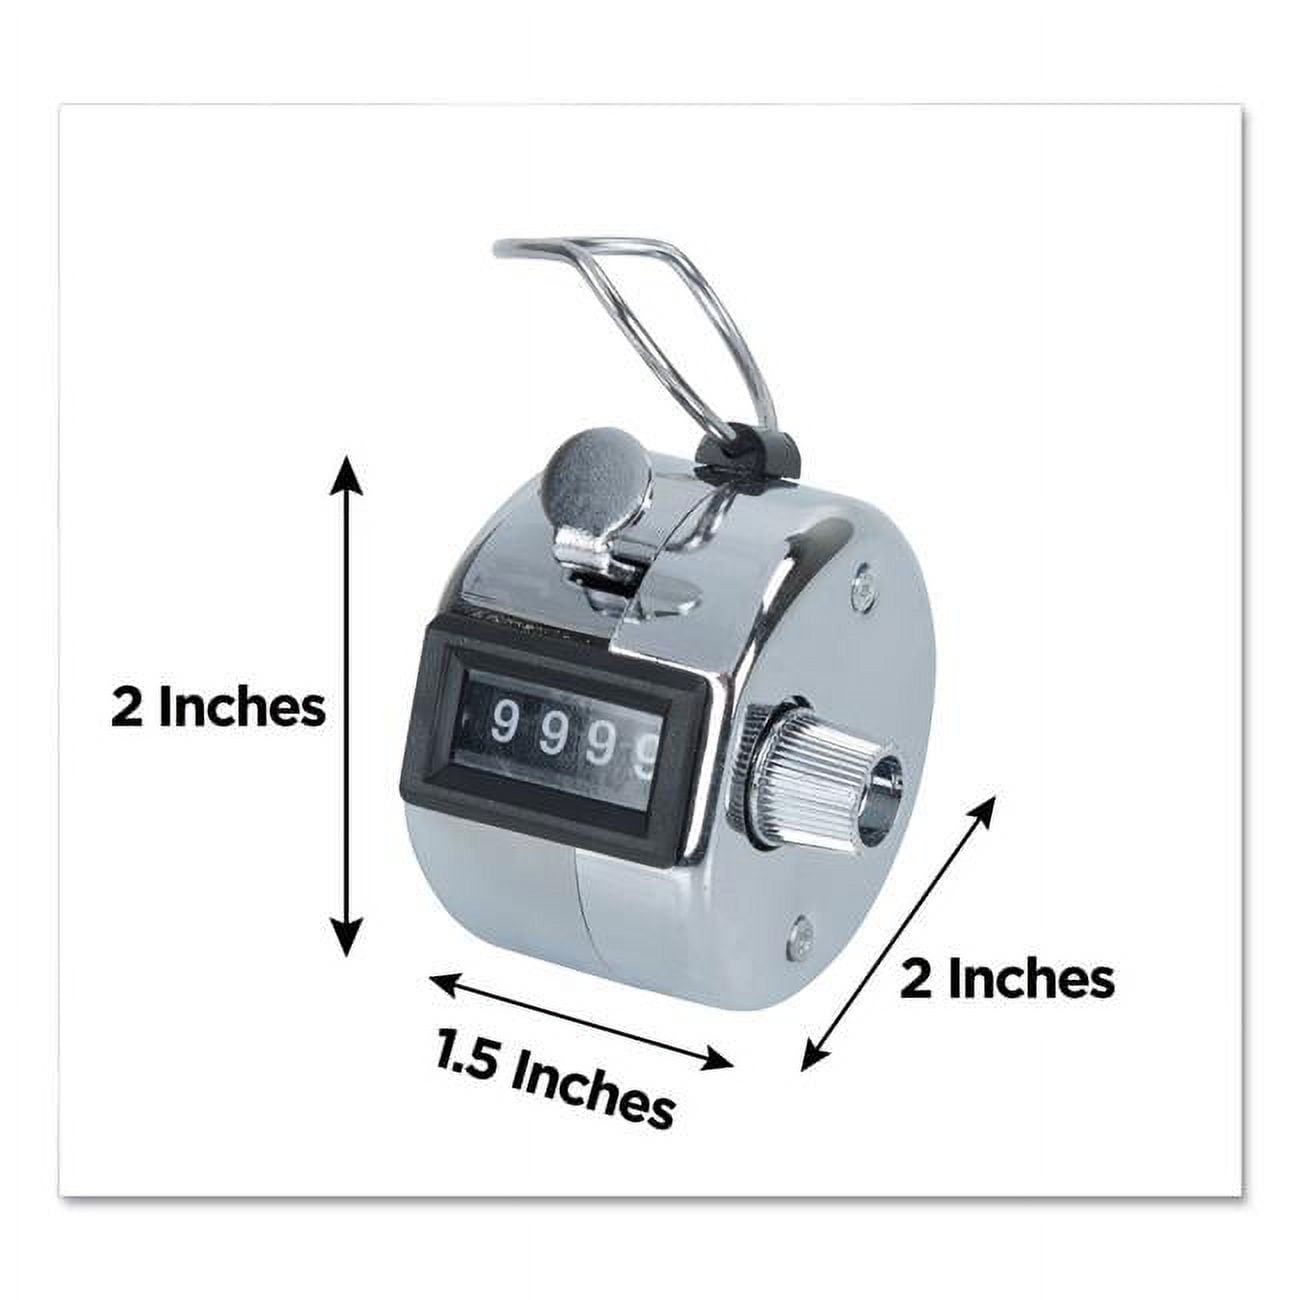 Stalwart Tally Counter Clicker - Handheld or Base Mount